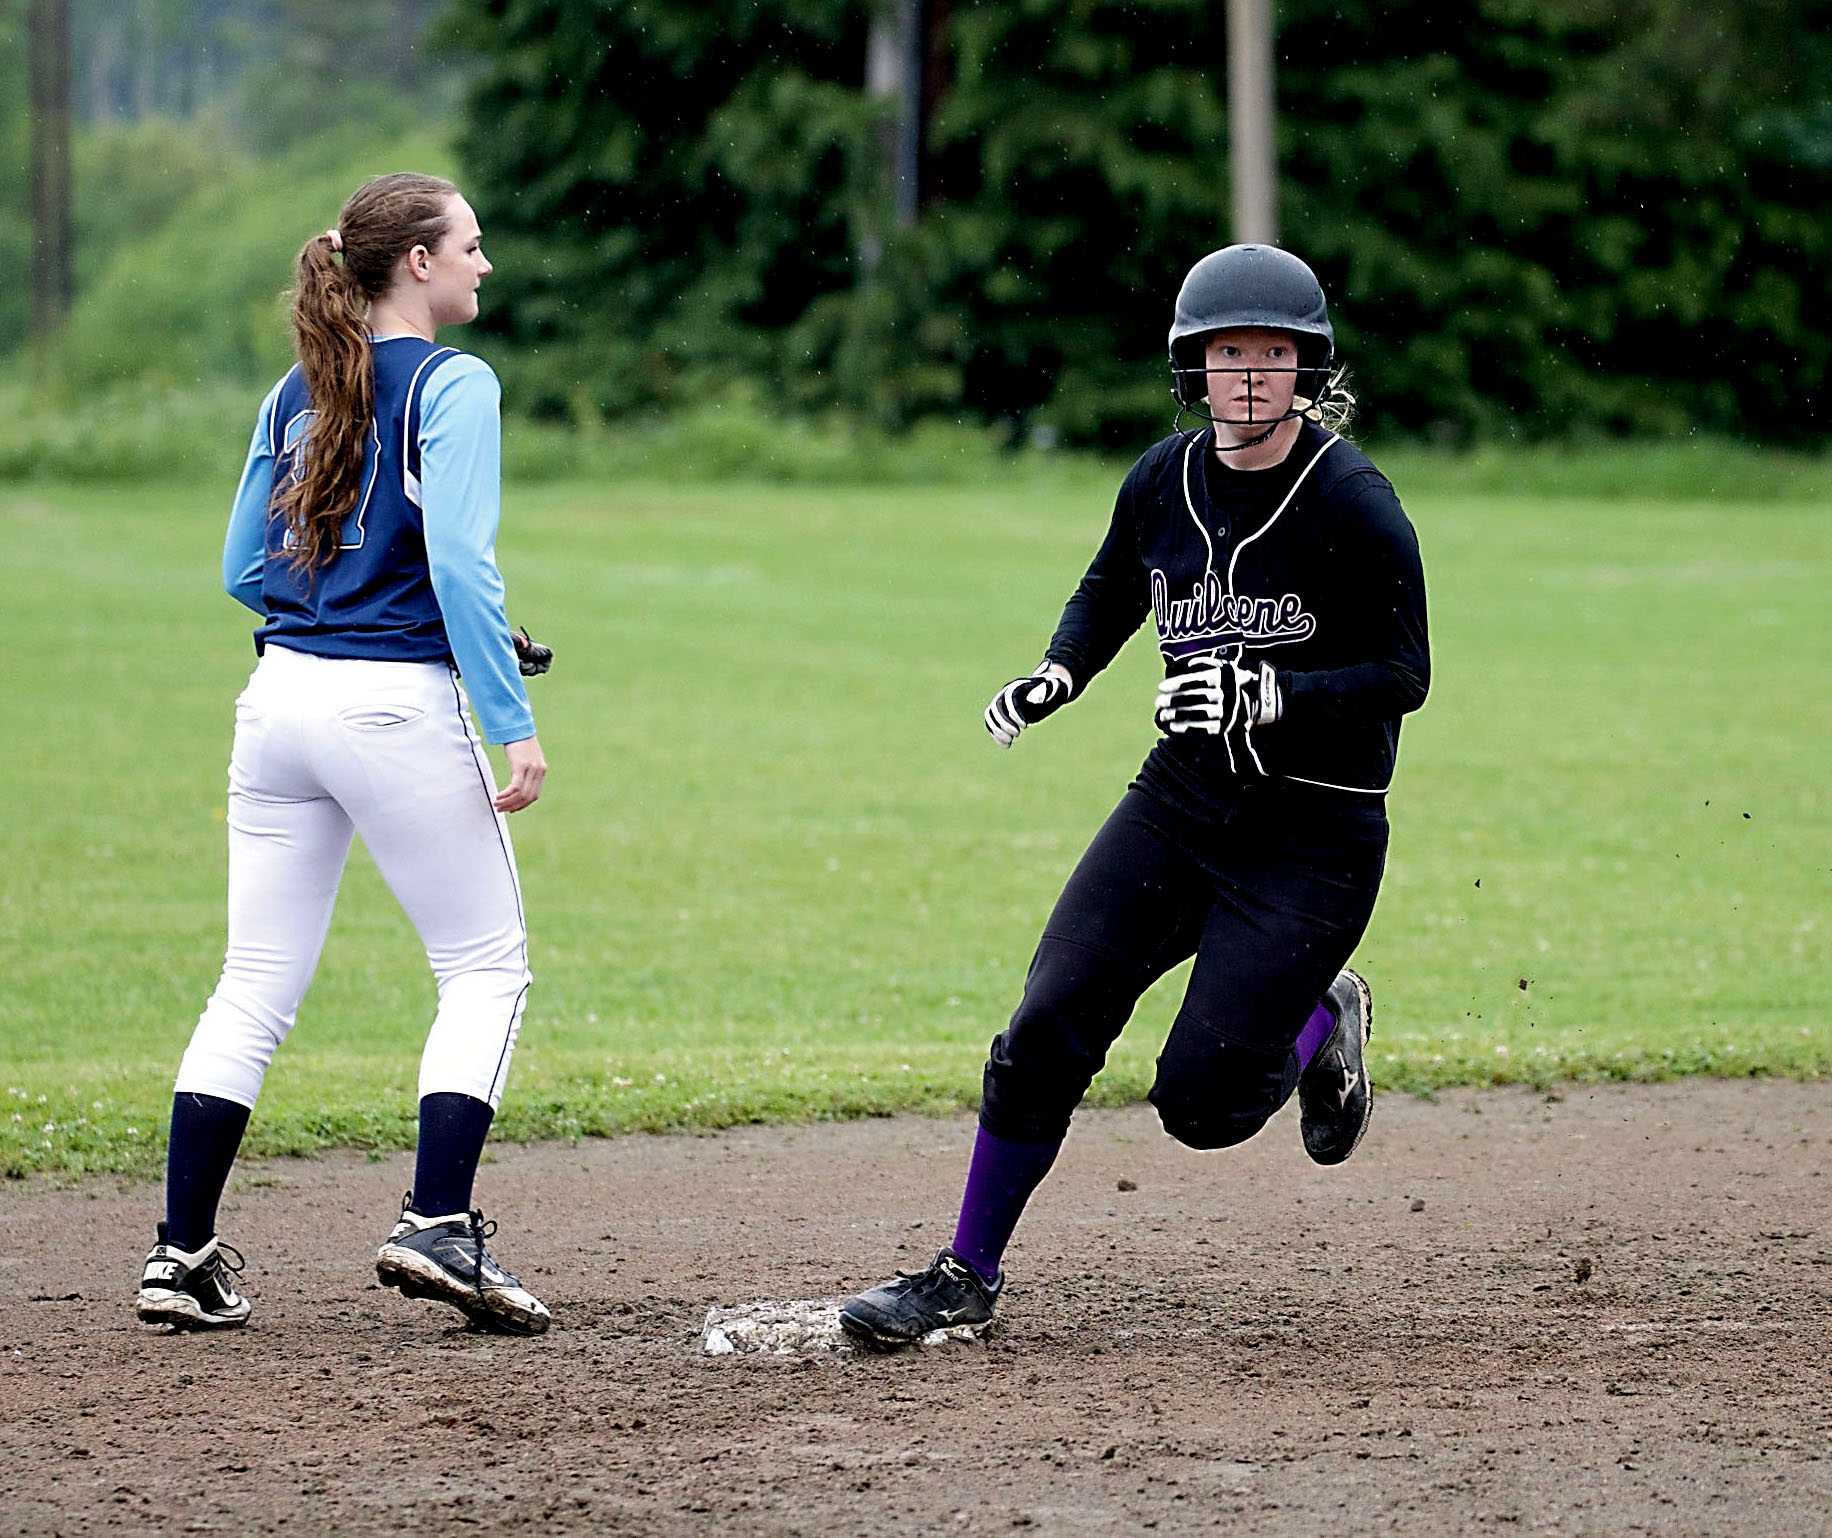 Quilcene's Katie Bailey rounds second base on her way to a stand-up triple against Rainier Christian. (Steve Mullensky/for Peninsula Daily News)